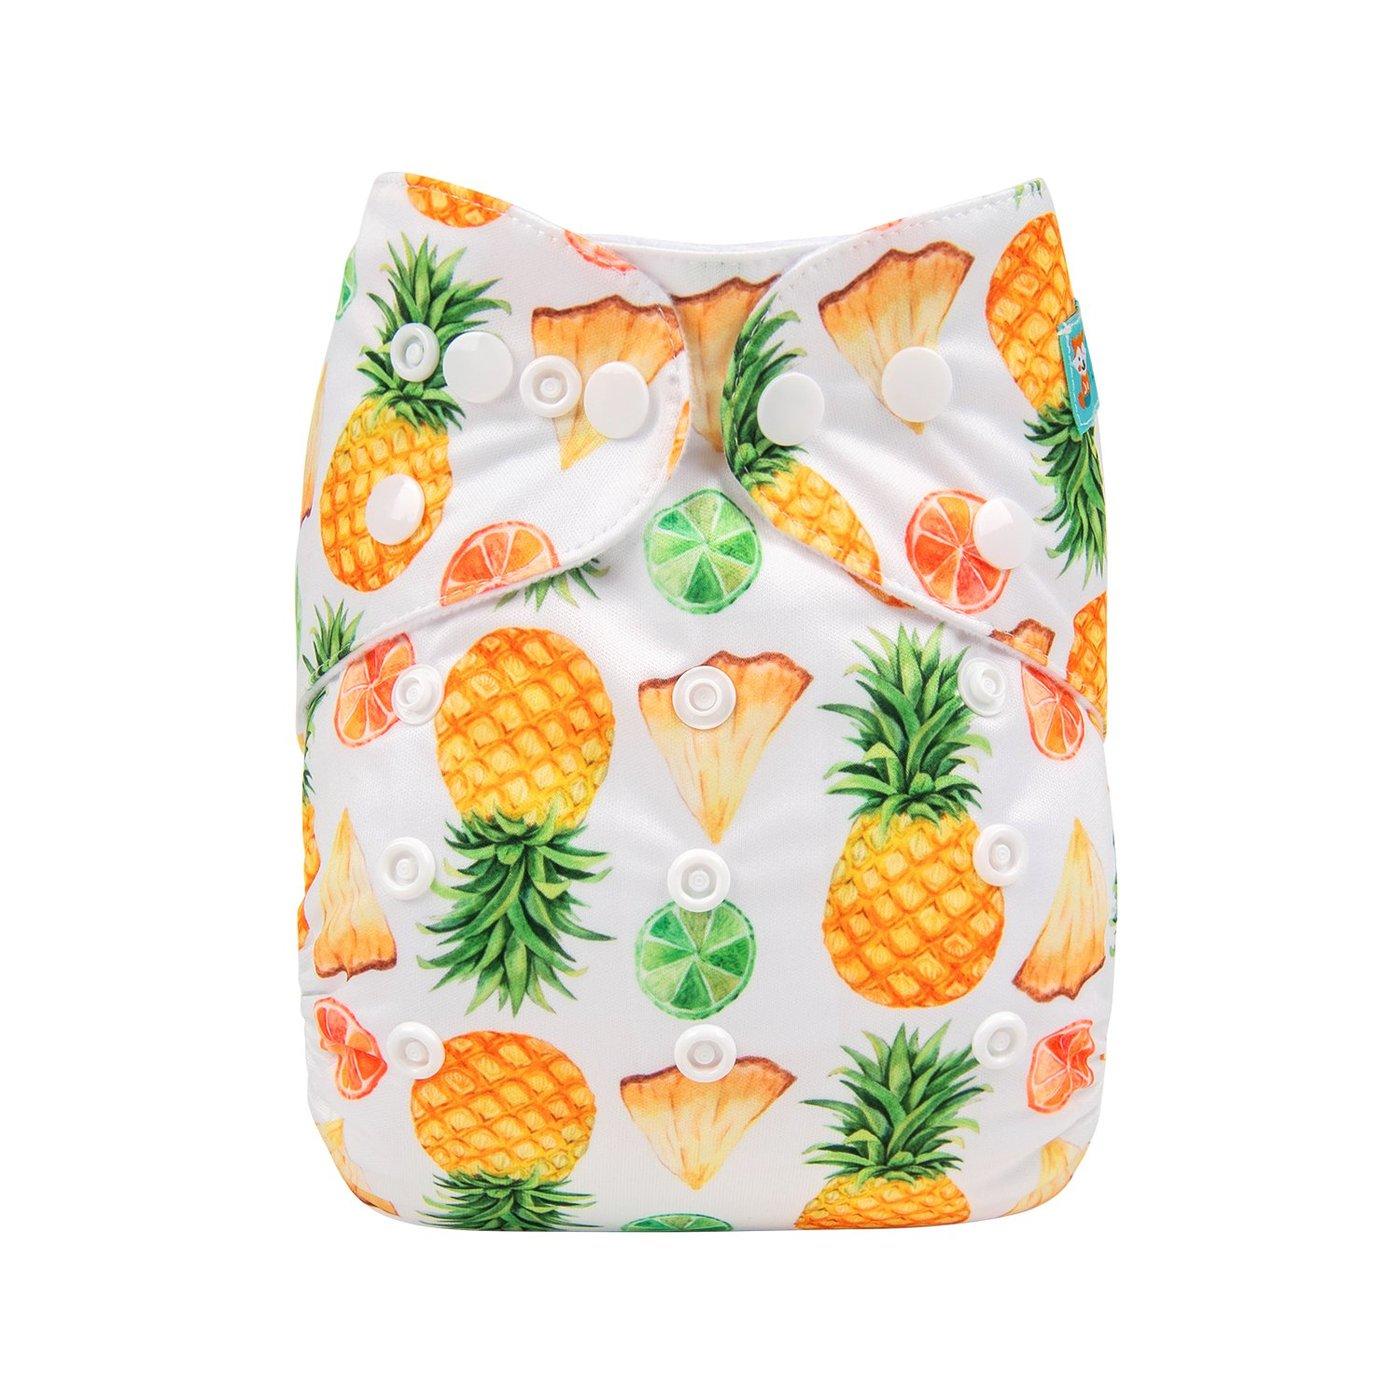 White pocket nappy with whole pineapples, segements of pineapple and halved limes pattern